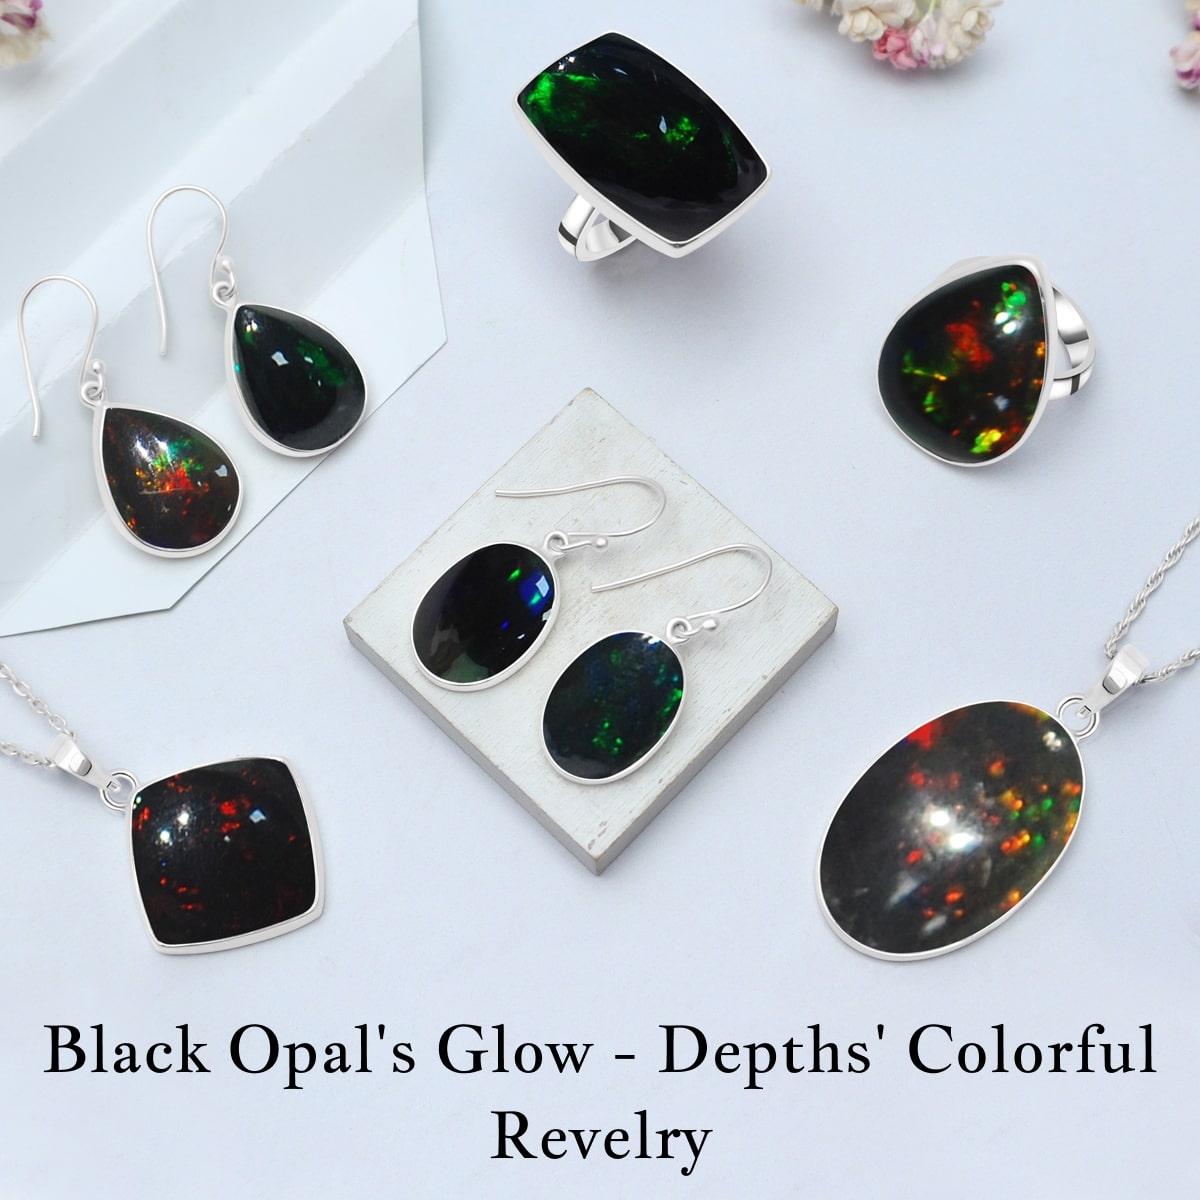 Black Opal Radiance: A Colorful Dance in the Shadowy Depths